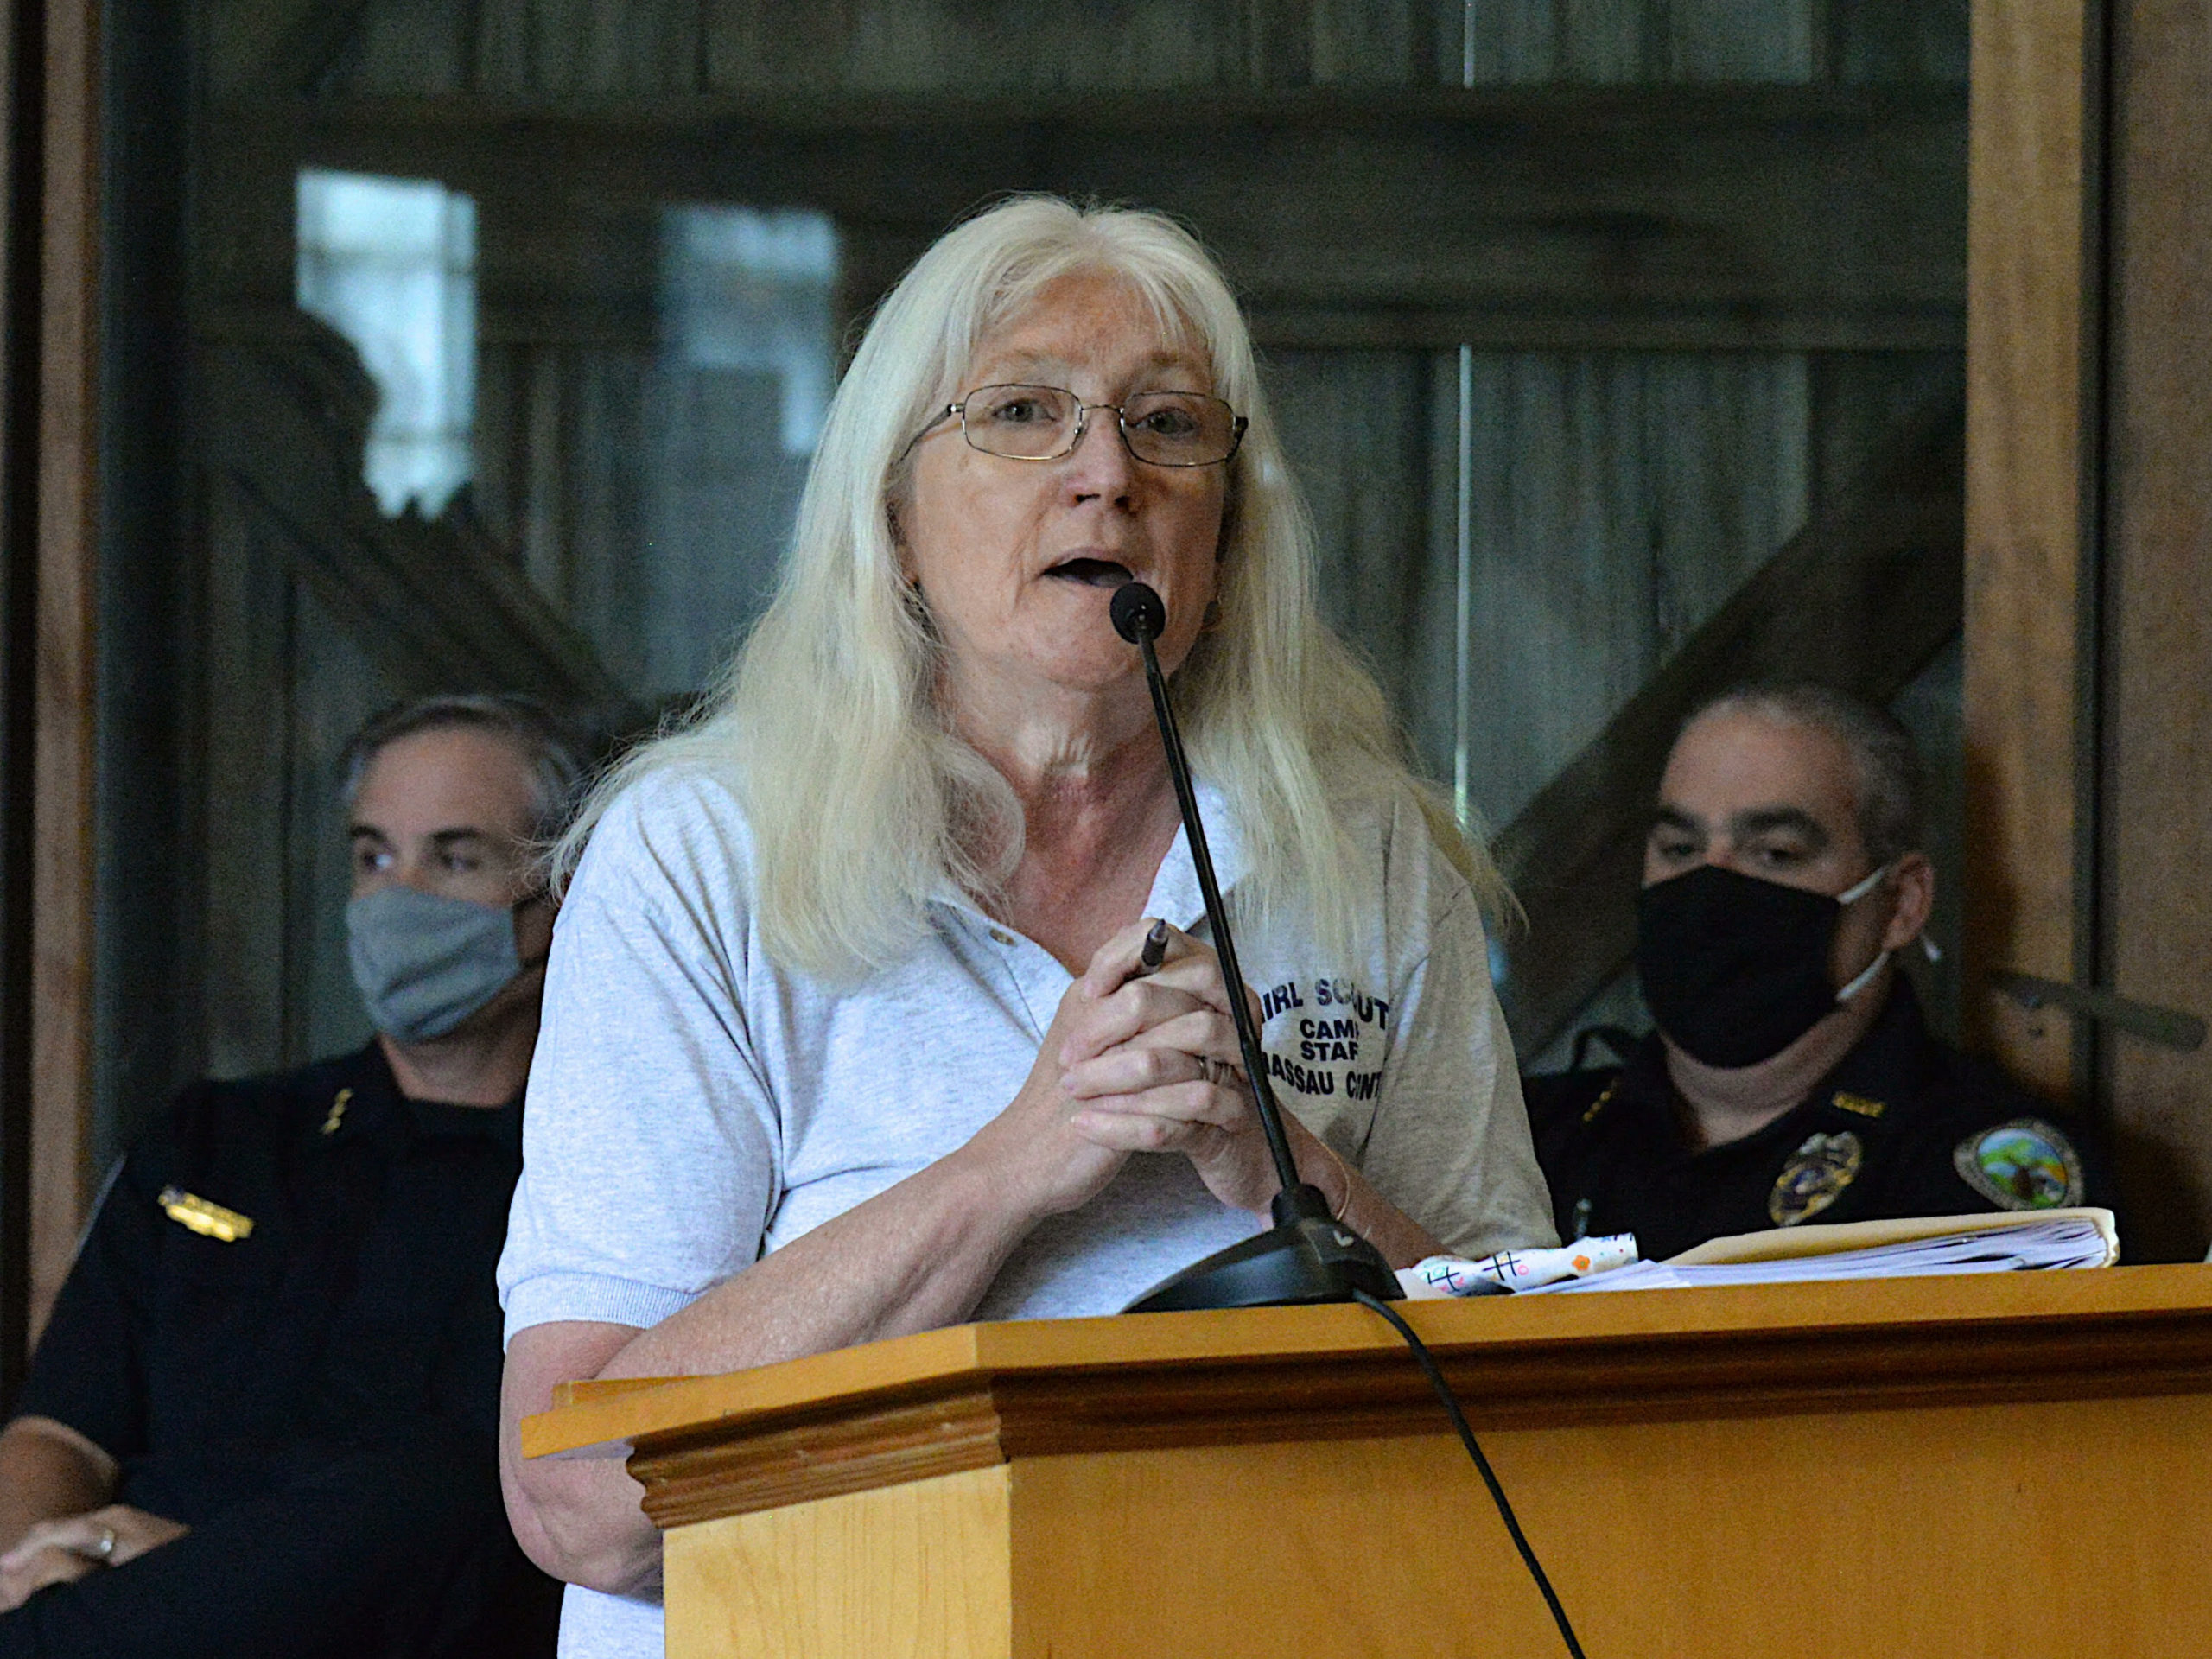 Laura Bisset-Carr, the director of Camp Blue Bay, told the East Hampton Town Board on Tuesday that the Girl Scouts of Nassau County, which owns the camp, would revisit the 120-foot height limit they had placed on the allowable height of a cellular tower on their property in light of the town's need for at least 150-foot tower for it's emergency communications equipment.